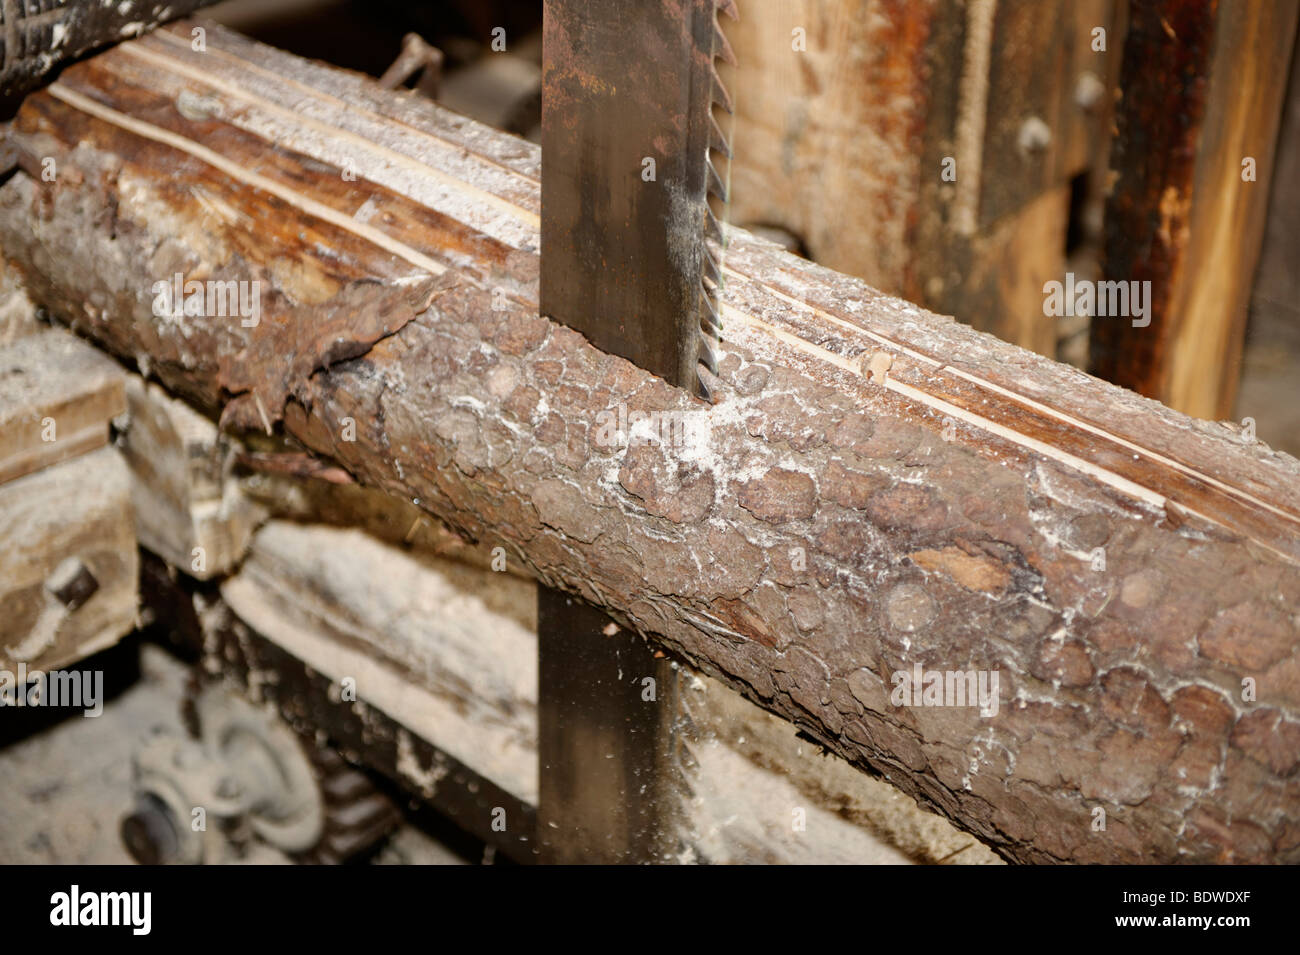 Historic saw, sawing of a tree trunk, rift saw, sawmill Stock Photo